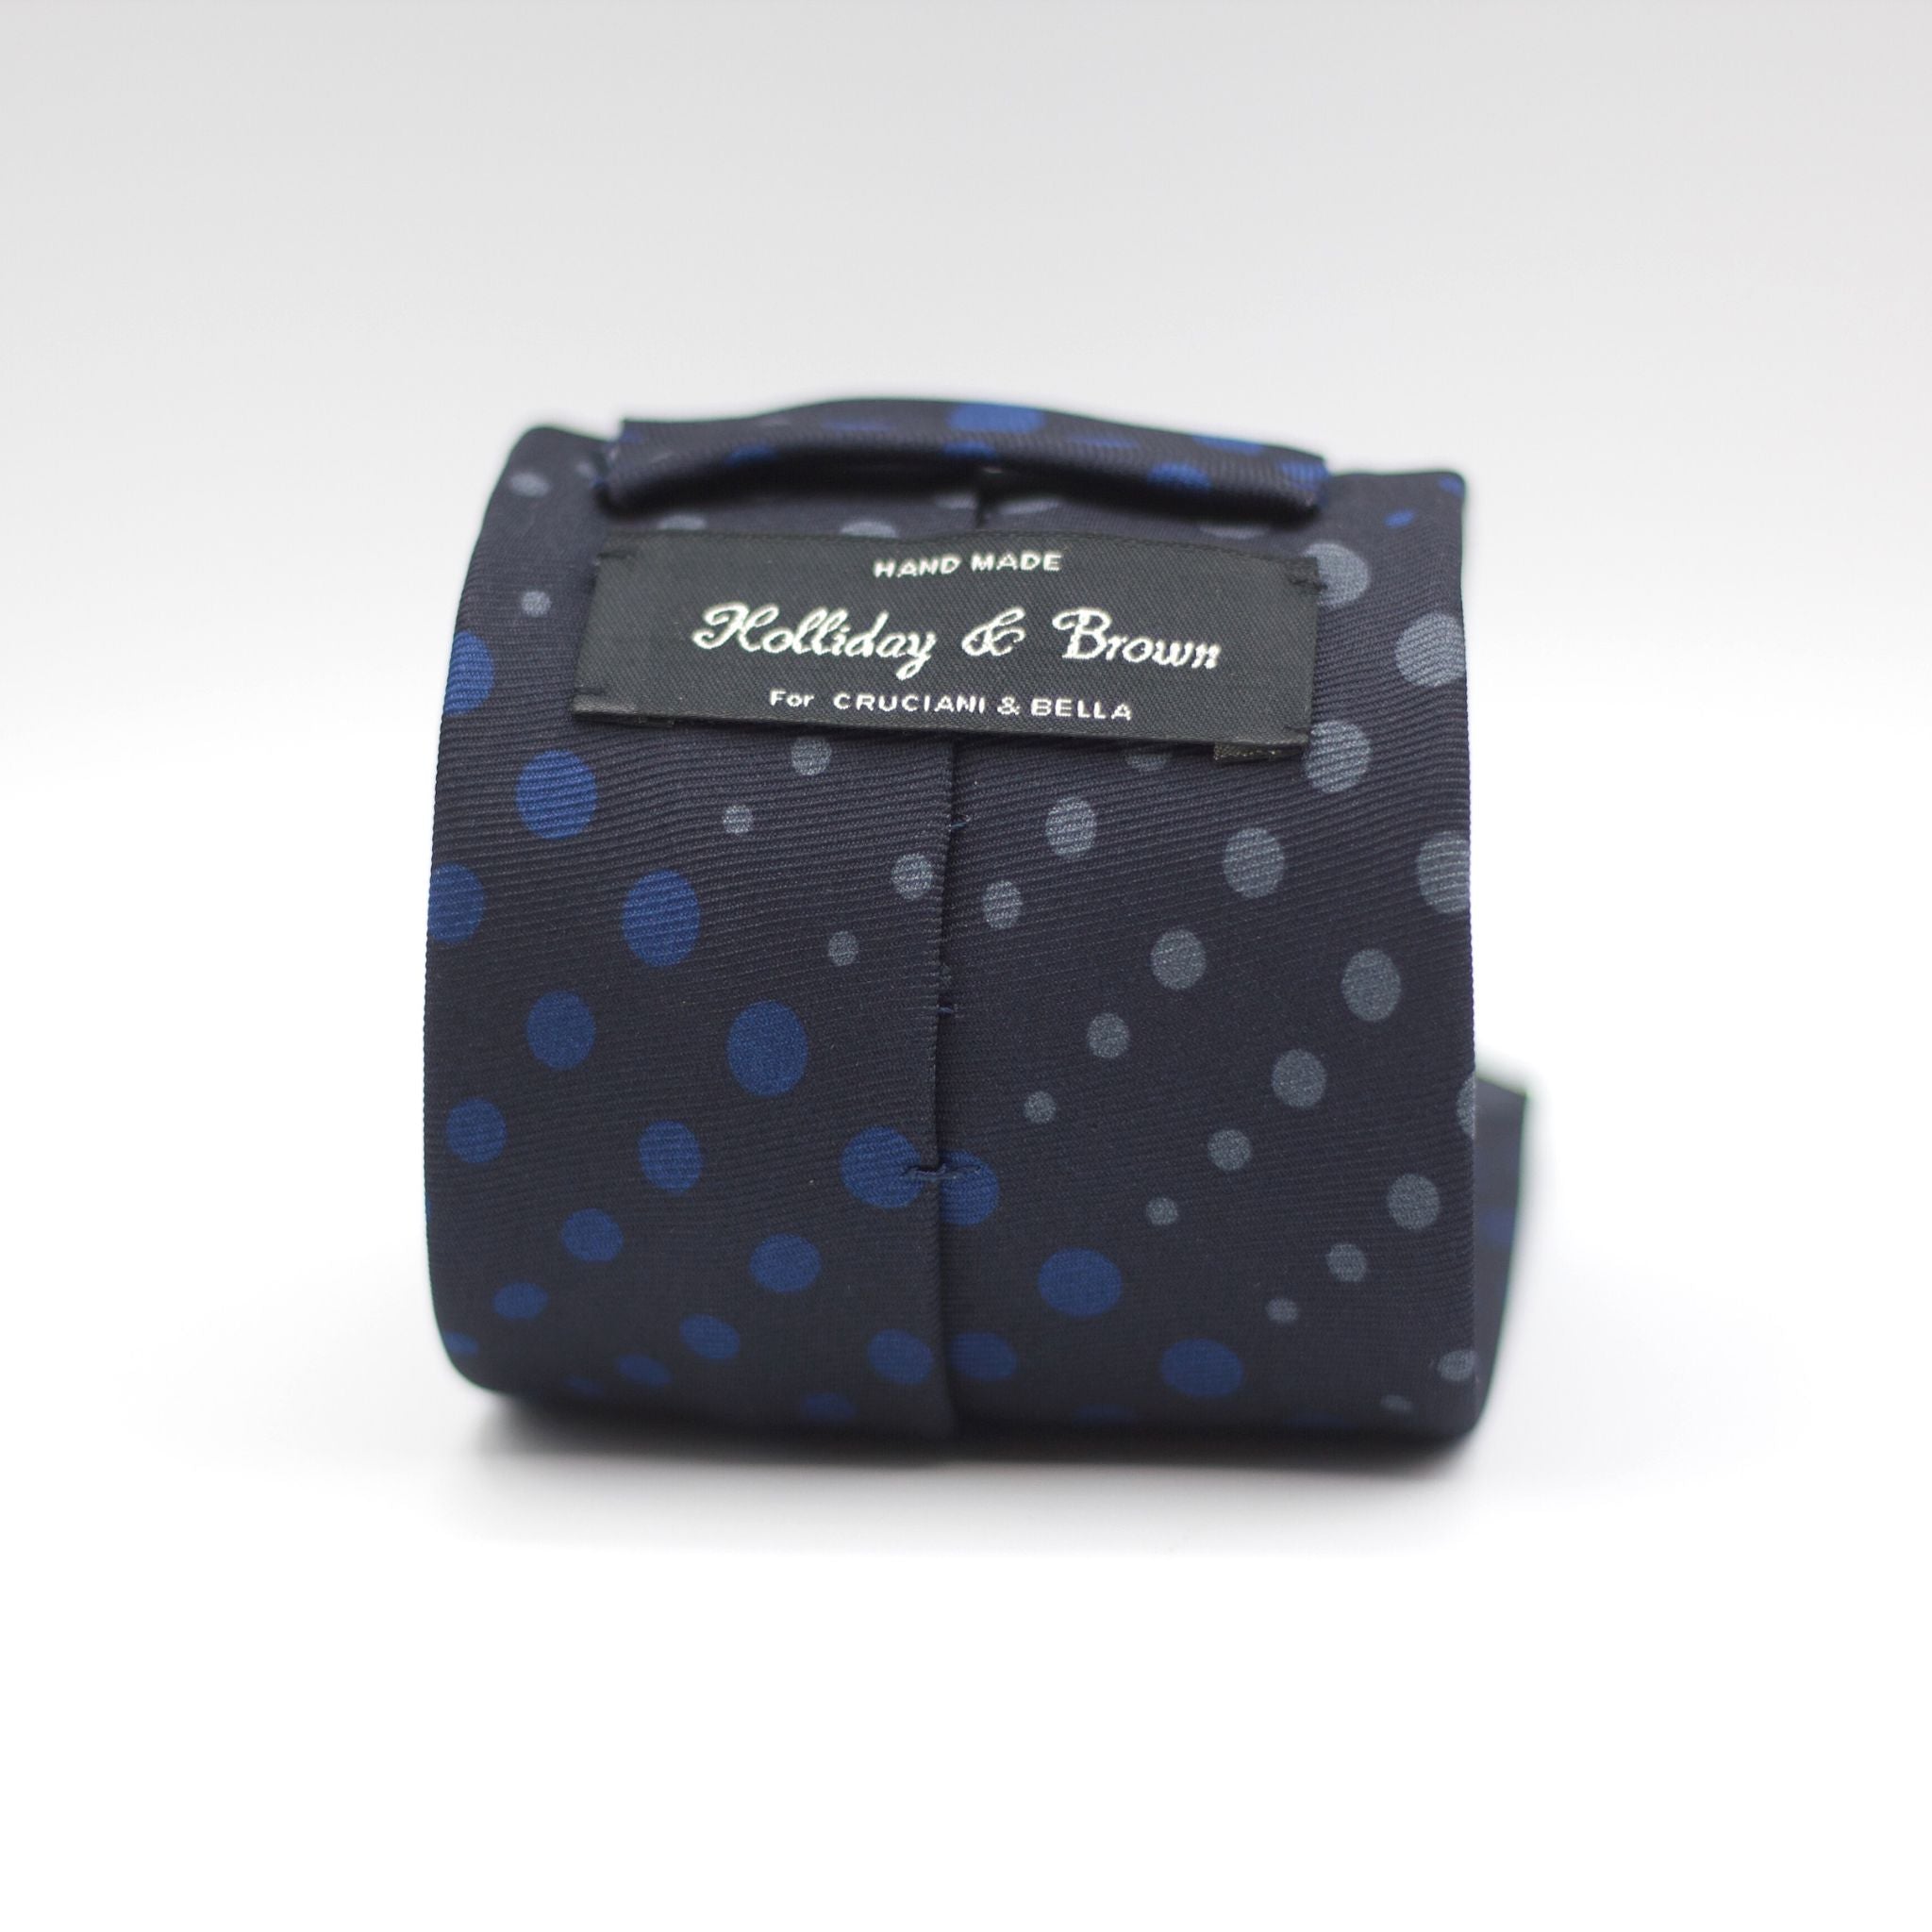 Holliday & Brown - Printed Silk - Navy, Light Blue and Grey dots Tie